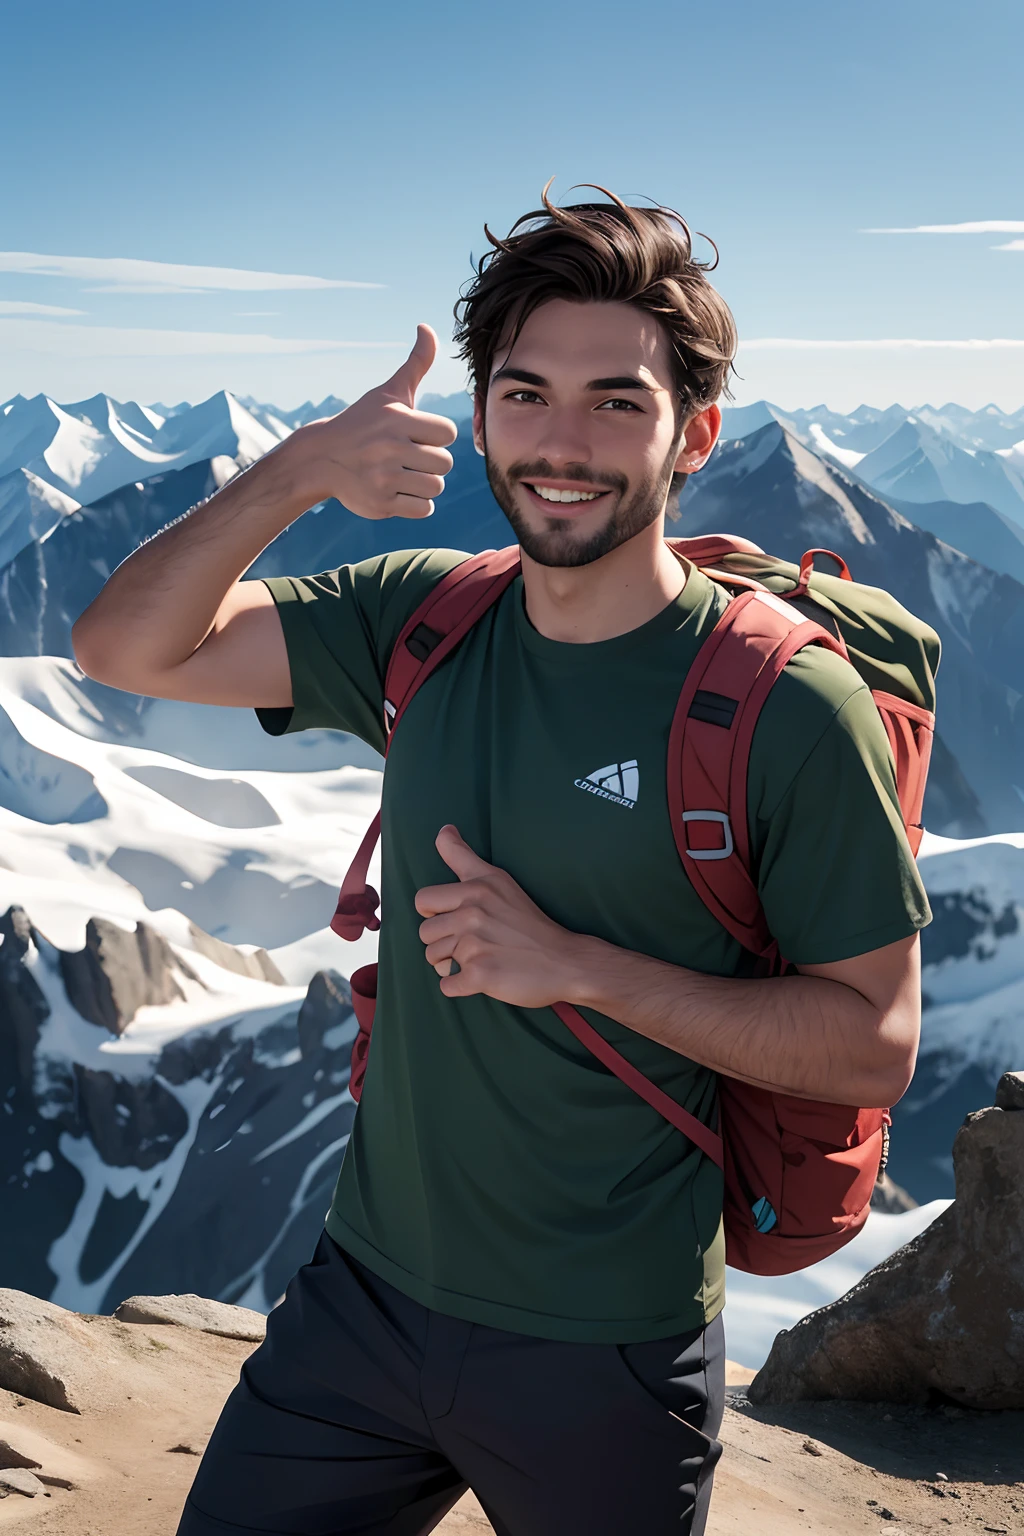 The image features a man standing on a mountain, giving a thumbs-up sign. He is wearing a green shirt and appears to be enjoying his time on the mountain. The man is also wearing a backpack, which suggests that he might be on a hiking or outdoor adventure. The mountain in the background provides a scenic backdrop for the man's thumbs-up gesture, indicating that he is having a good time and possibly celebrating his accomplishment of reaching the summit.